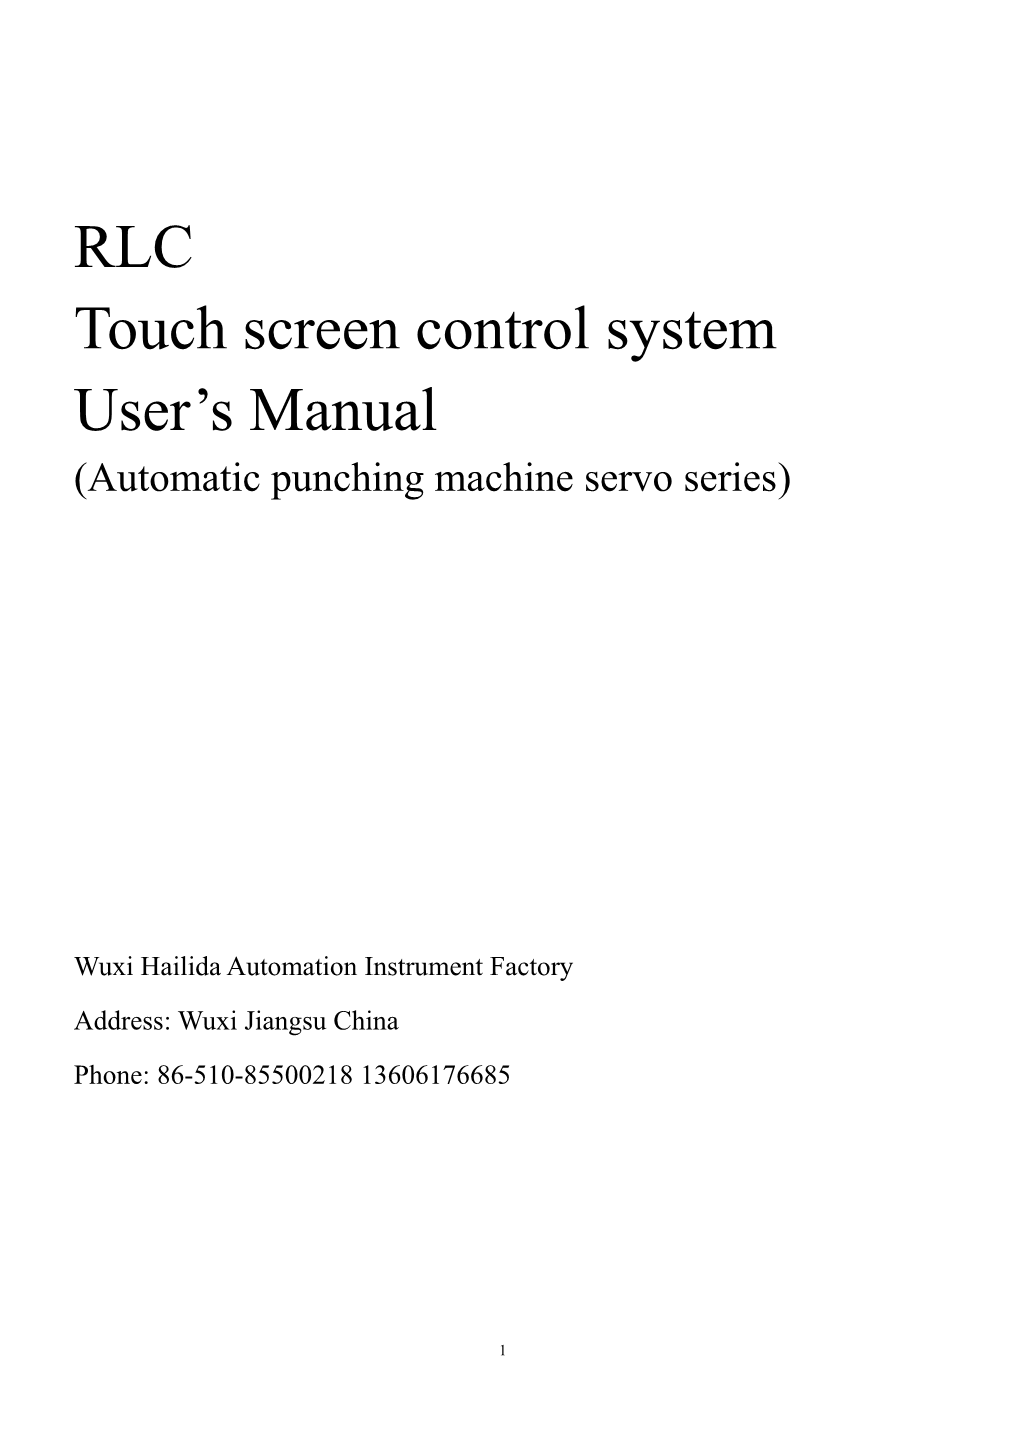 Touch Screen Control System